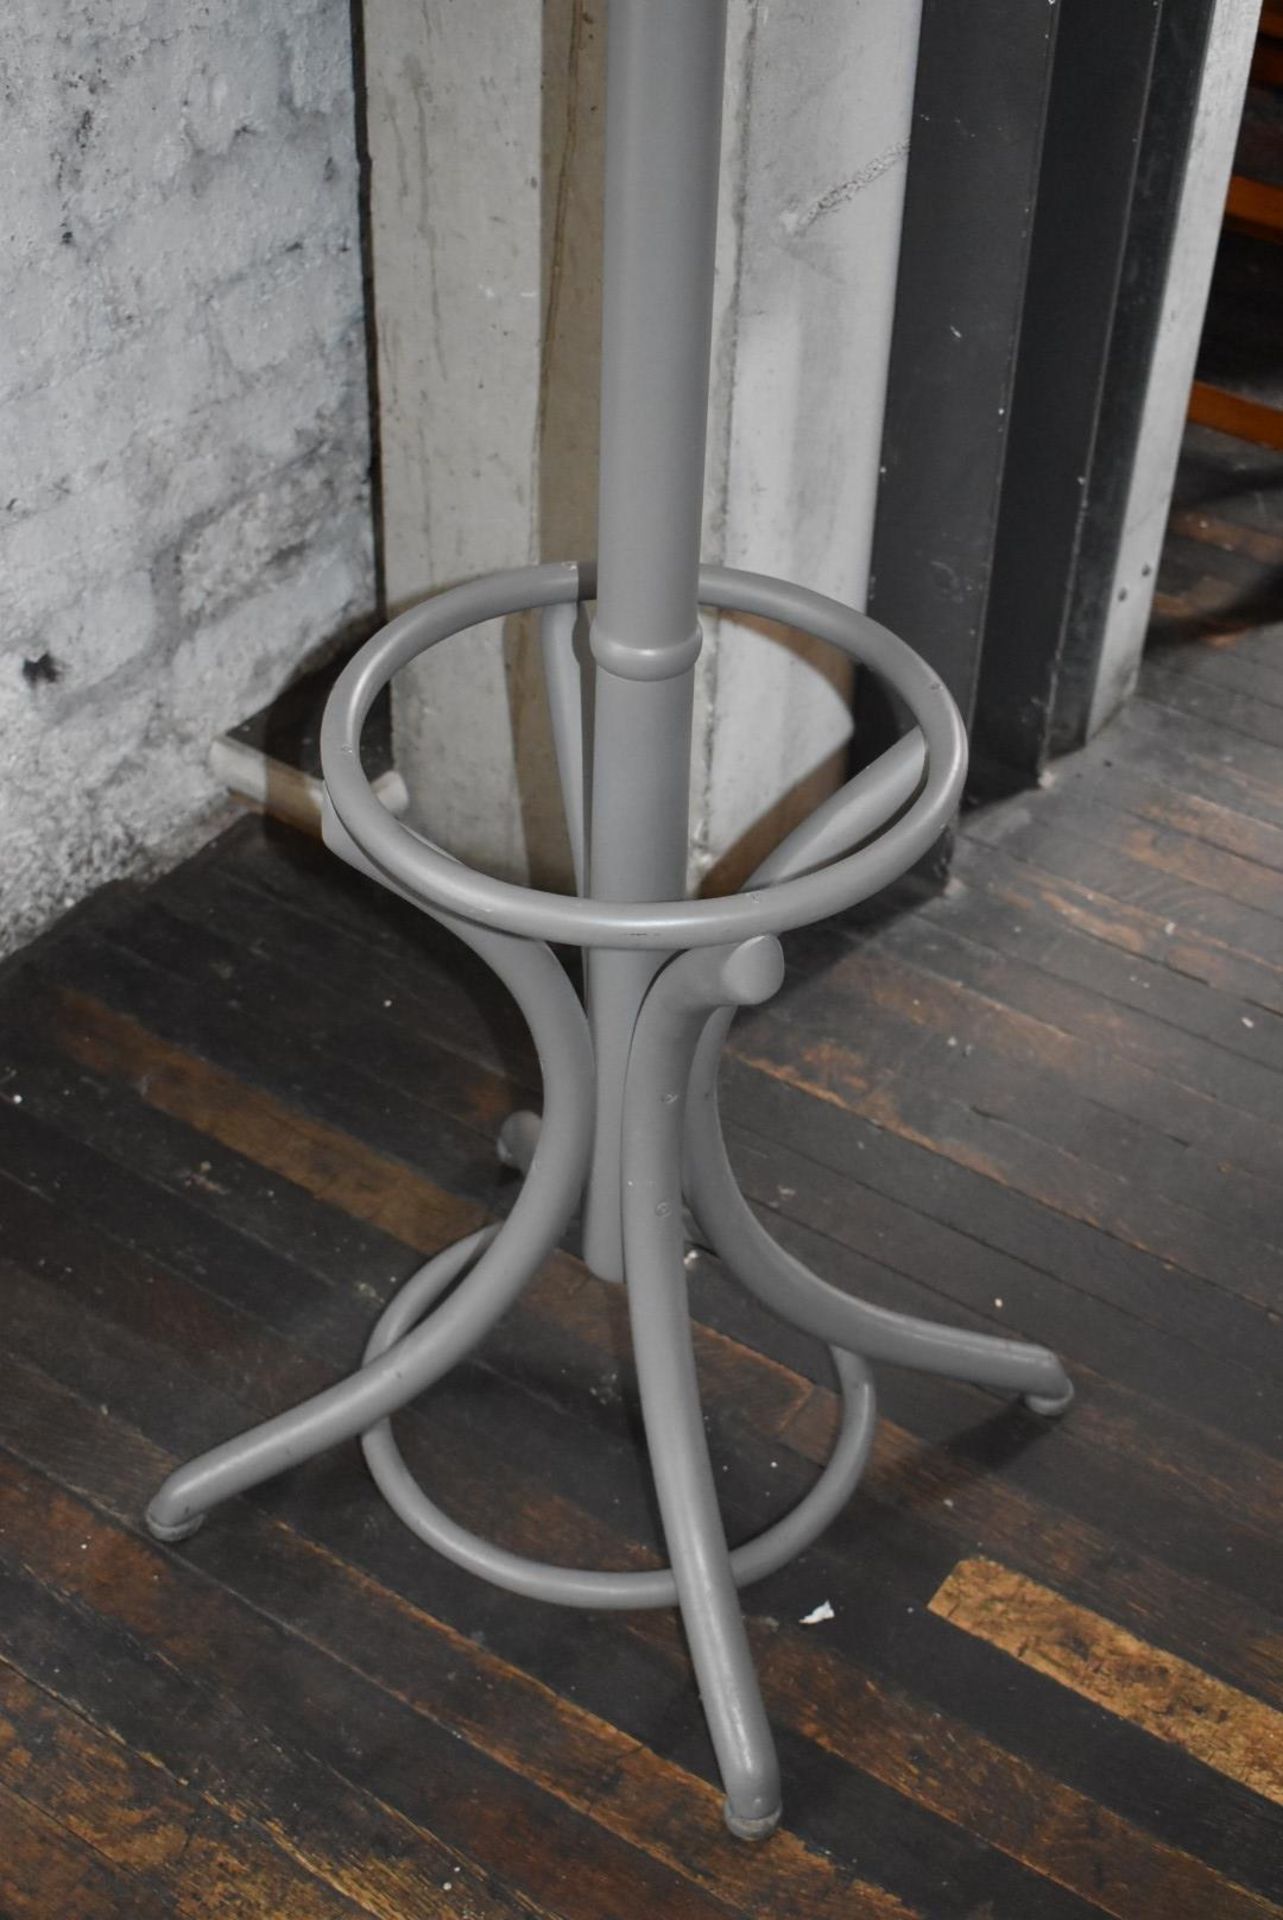 1 x Bentwood Coat Hanging Stand With a Contemporary Grey Finish - Image 3 of 4